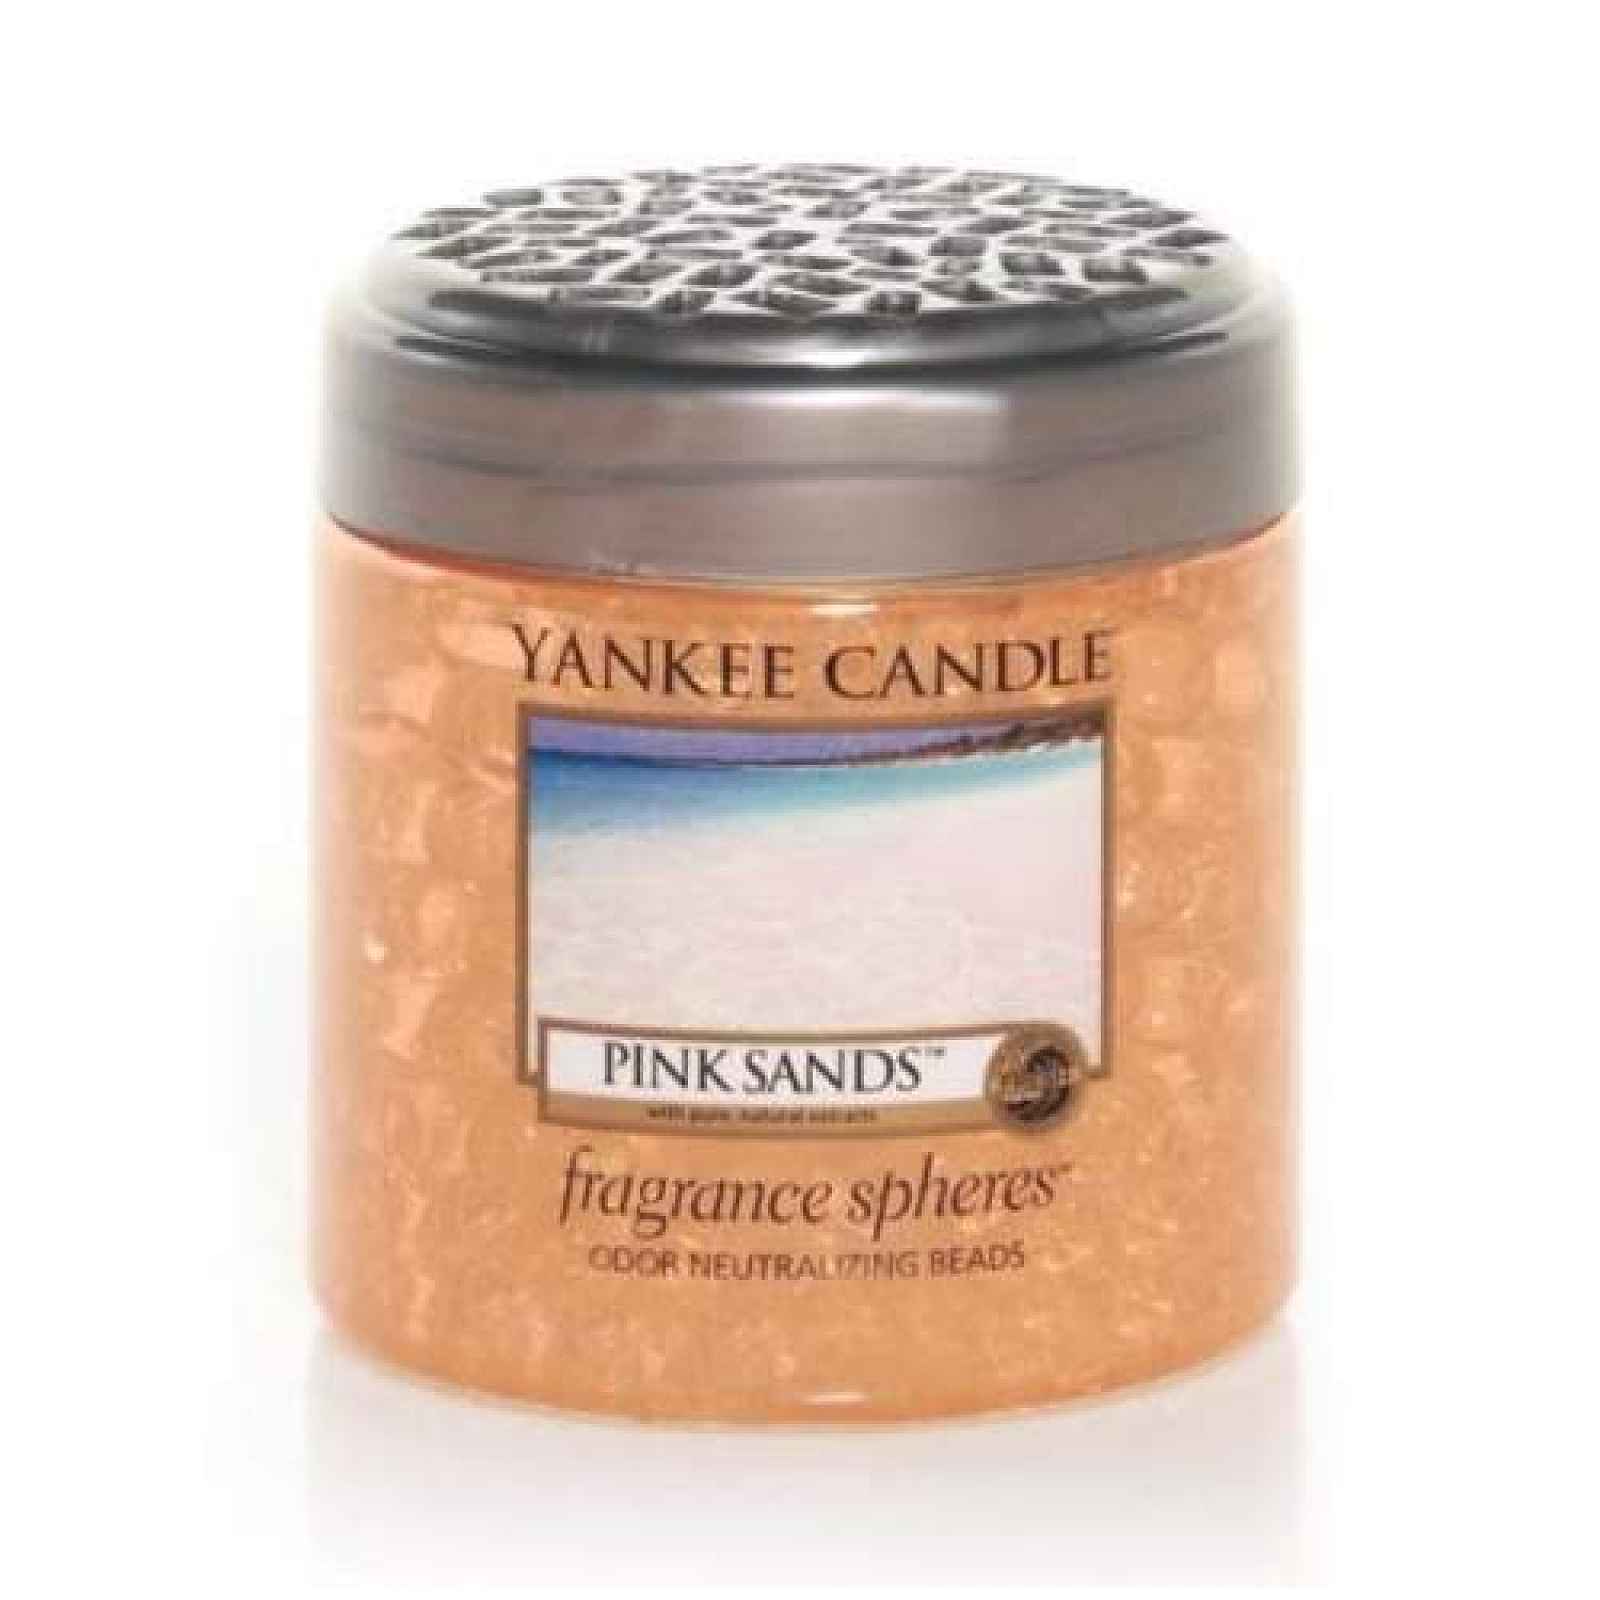 Perly Fragrance Spheres YANKEE CANDLE Pink Sands